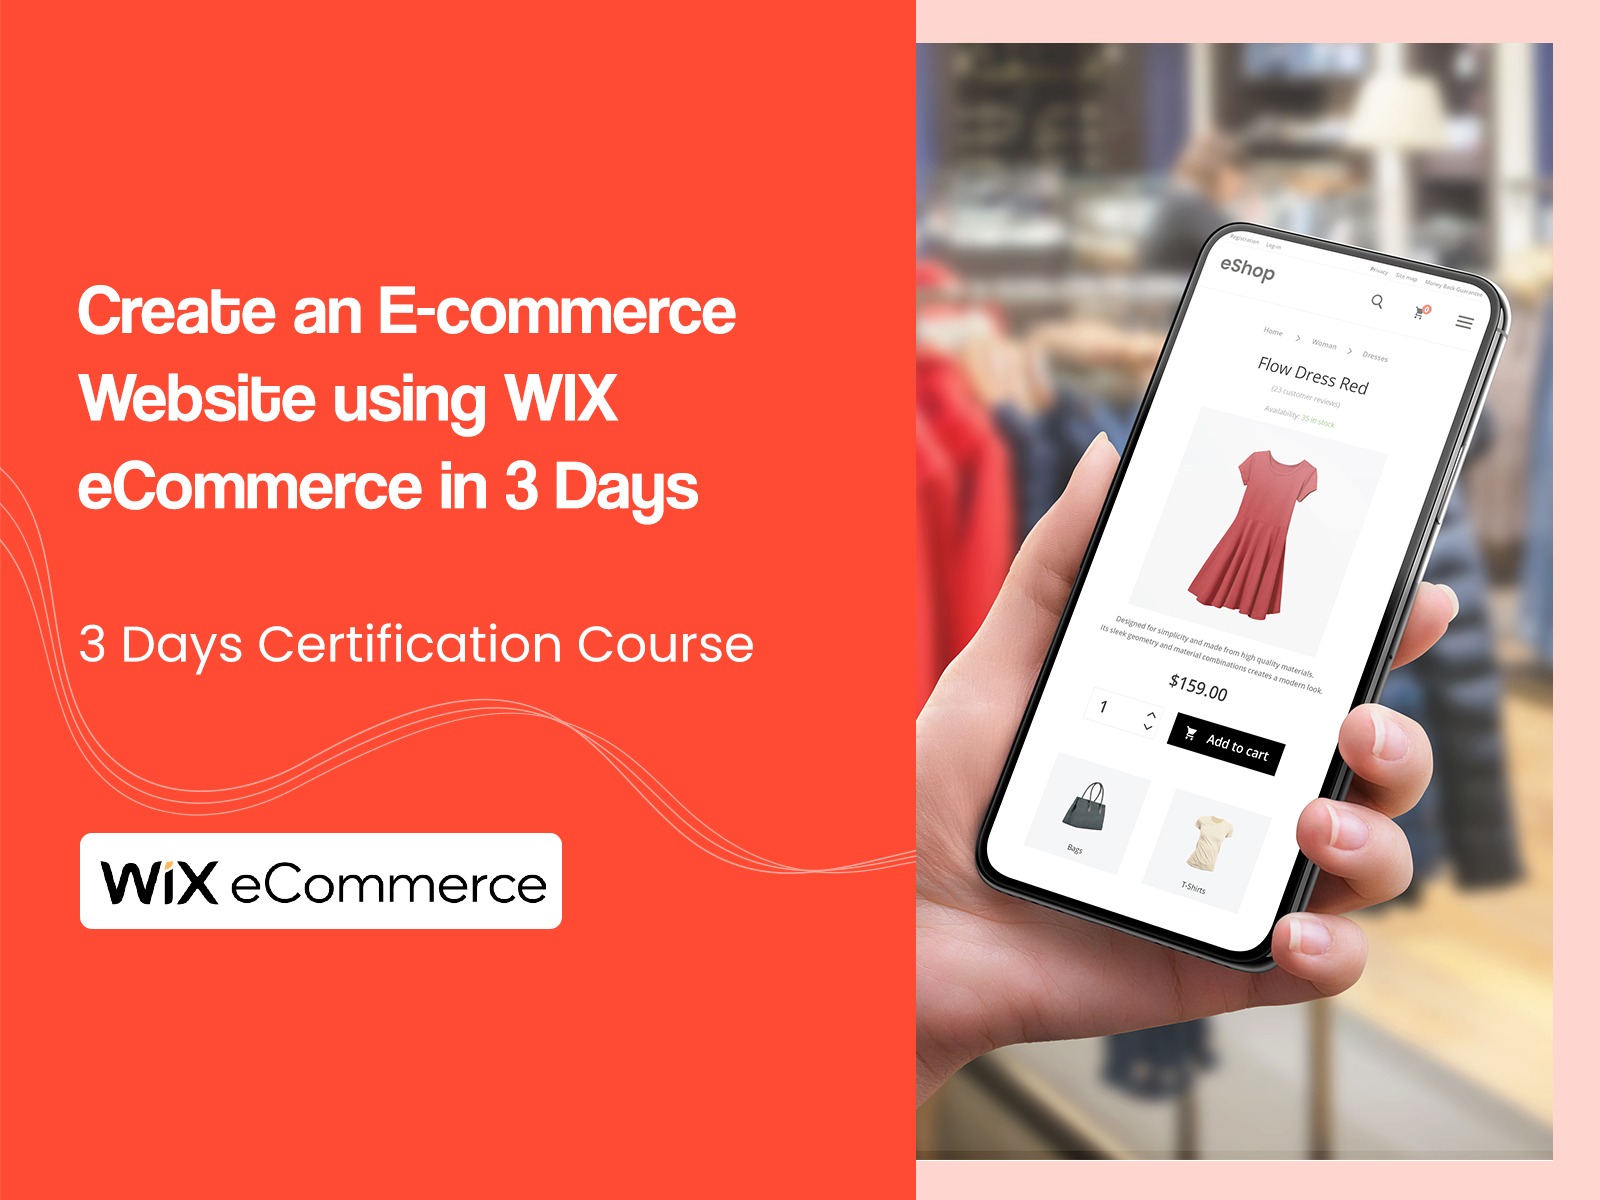 Create an E-commerce Website using WIX eCommerce in 3 Days course in Singapore